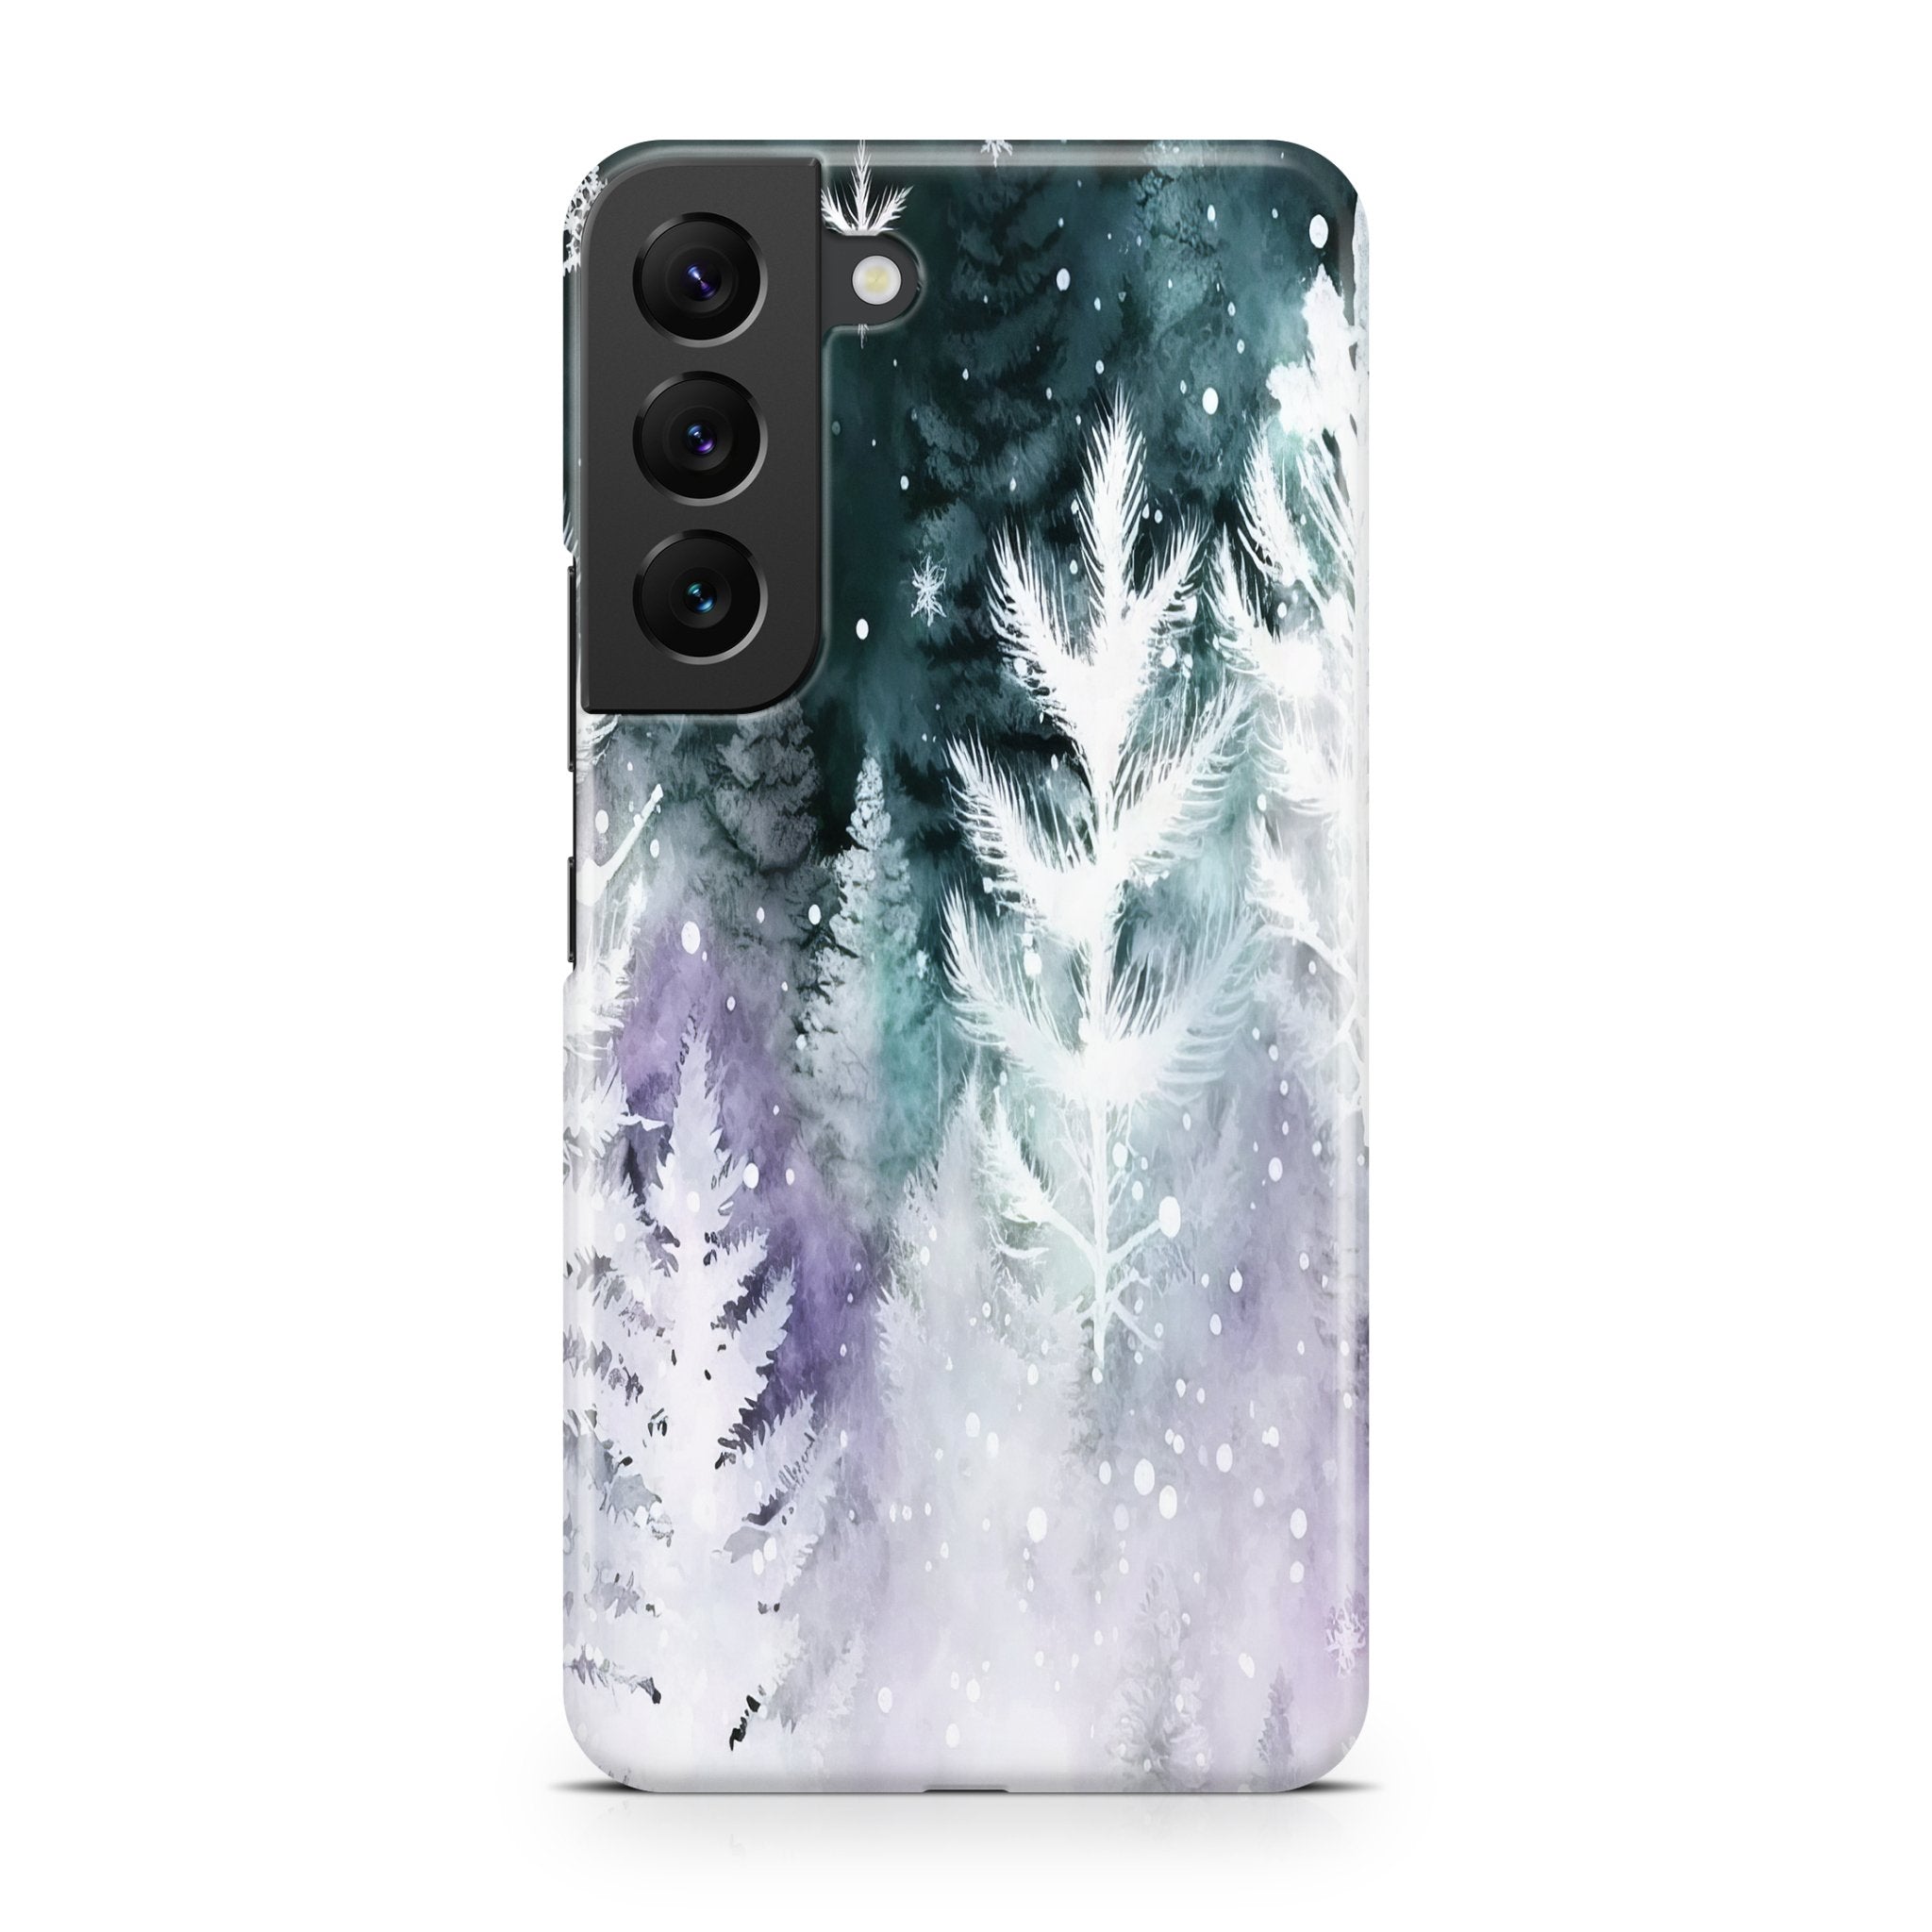 Winter Midnight - Samsung phone case designs by CaseSwagger